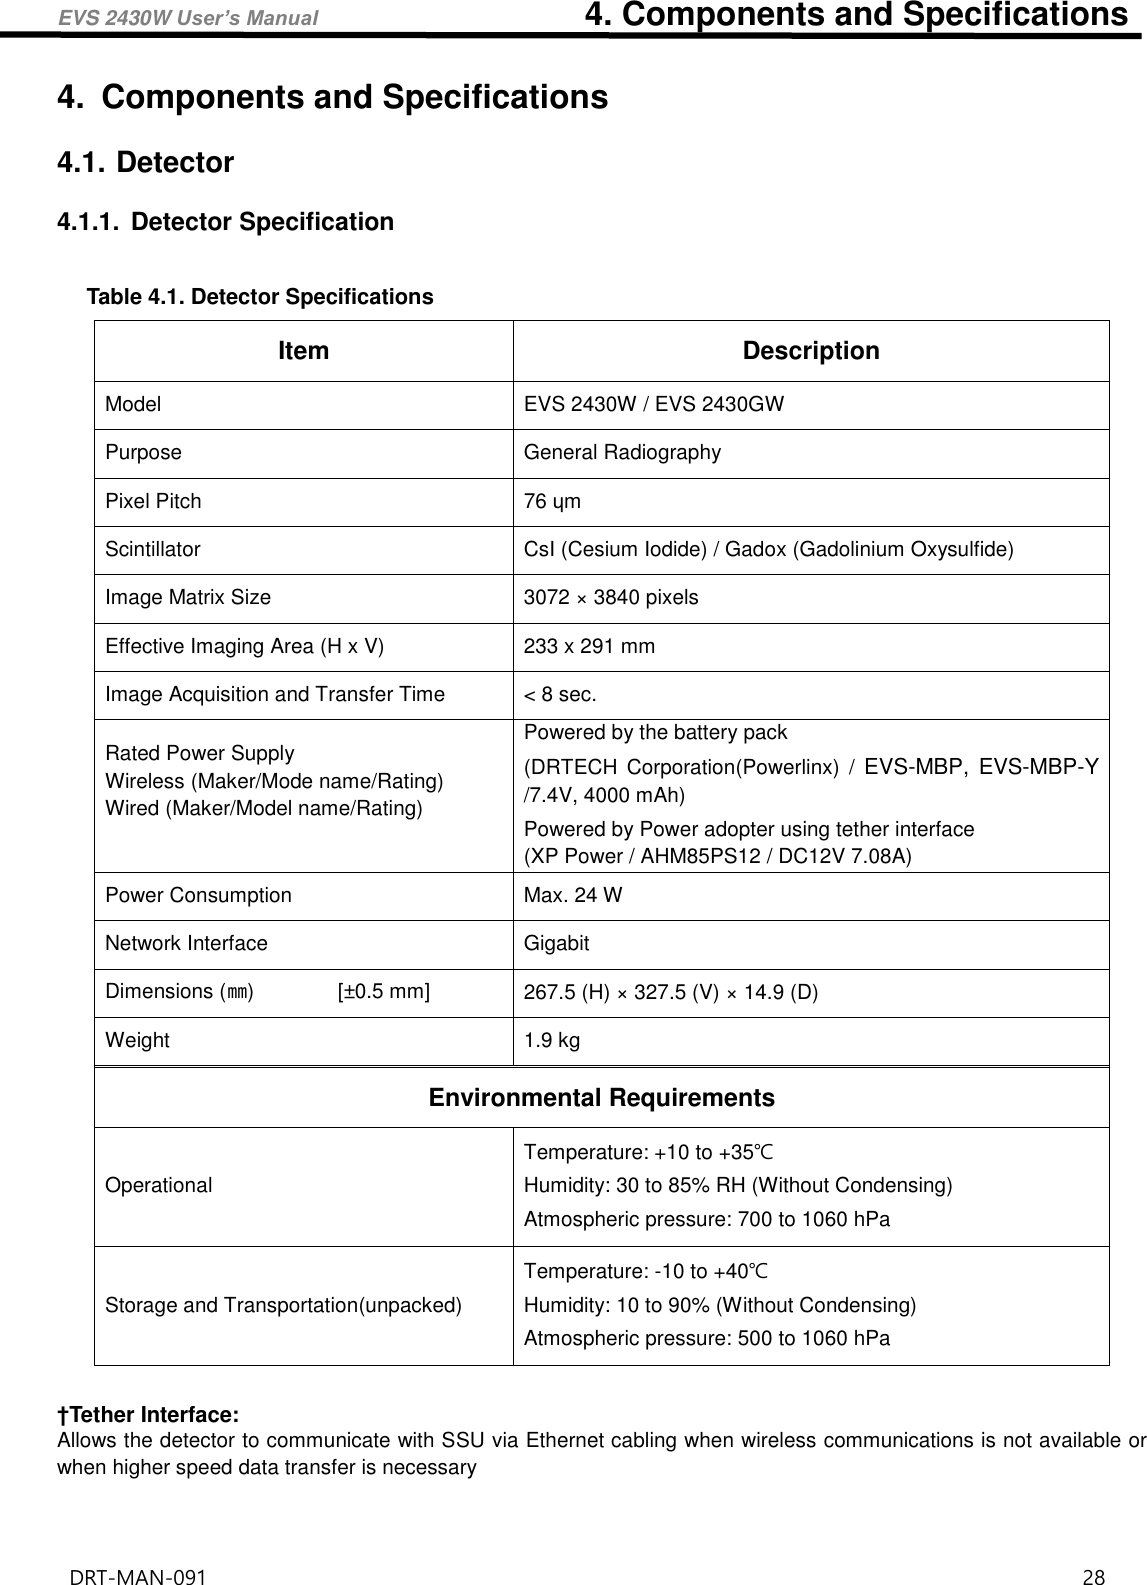 EVS 2430W User’s Manual                                4. Components and Specifications DRT-MAN-091                                                                                    28   4.  Components and Specifications   4.1. Detector 4.1.1.  Detector Specification  Table 4.1. Detector Specifications Item Description Model EVS 2430W / EVS 2430GW Purpose General Radiography Pixel Pitch 76 ɥm Scintillator CsI (Cesium Iodide) / Gadox (Gadolinium Oxysulfide) Image Matrix Size 3072 × 3840 pixels Effective Imaging Area (H x V) 233 x 291 mm Image Acquisition and Transfer Time &lt; 8 sec. Rated Power Supply Wireless (Maker/Mode name/Rating) Wired (Maker/Model name/Rating)  Powered by the battery pack   (DRTECH  Corporation(Powerlinx)  /  EVS-MBP, EVS-MBP-Y   /7.4V, 4000 mAh) Powered by Power adopter using tether interface (XP Power / AHM85PS12 / DC12V 7.08A) Power Consumption Max. 24 W Network Interface Gigabit Dimensions (㎜)                [±0.5 mm] 267.5 (H) × 327.5 (V) × 14.9 (D) Weight 1.9 kg Environmental Requirements Operational Temperature: +10 to +35℃ Humidity: 30 to 85% RH (Without Condensing) Atmospheric pressure: 700 to 1060 hPa Storage and Transportation(unpacked) Temperature: -10 to +40℃ Humidity: 10 to 90% (Without Condensing) Atmospheric pressure: 500 to 1060 hPa  †Tether Interface: Allows the detector to communicate with SSU via Ethernet cabling when wireless communications is not available or when higher speed data transfer is necessary   